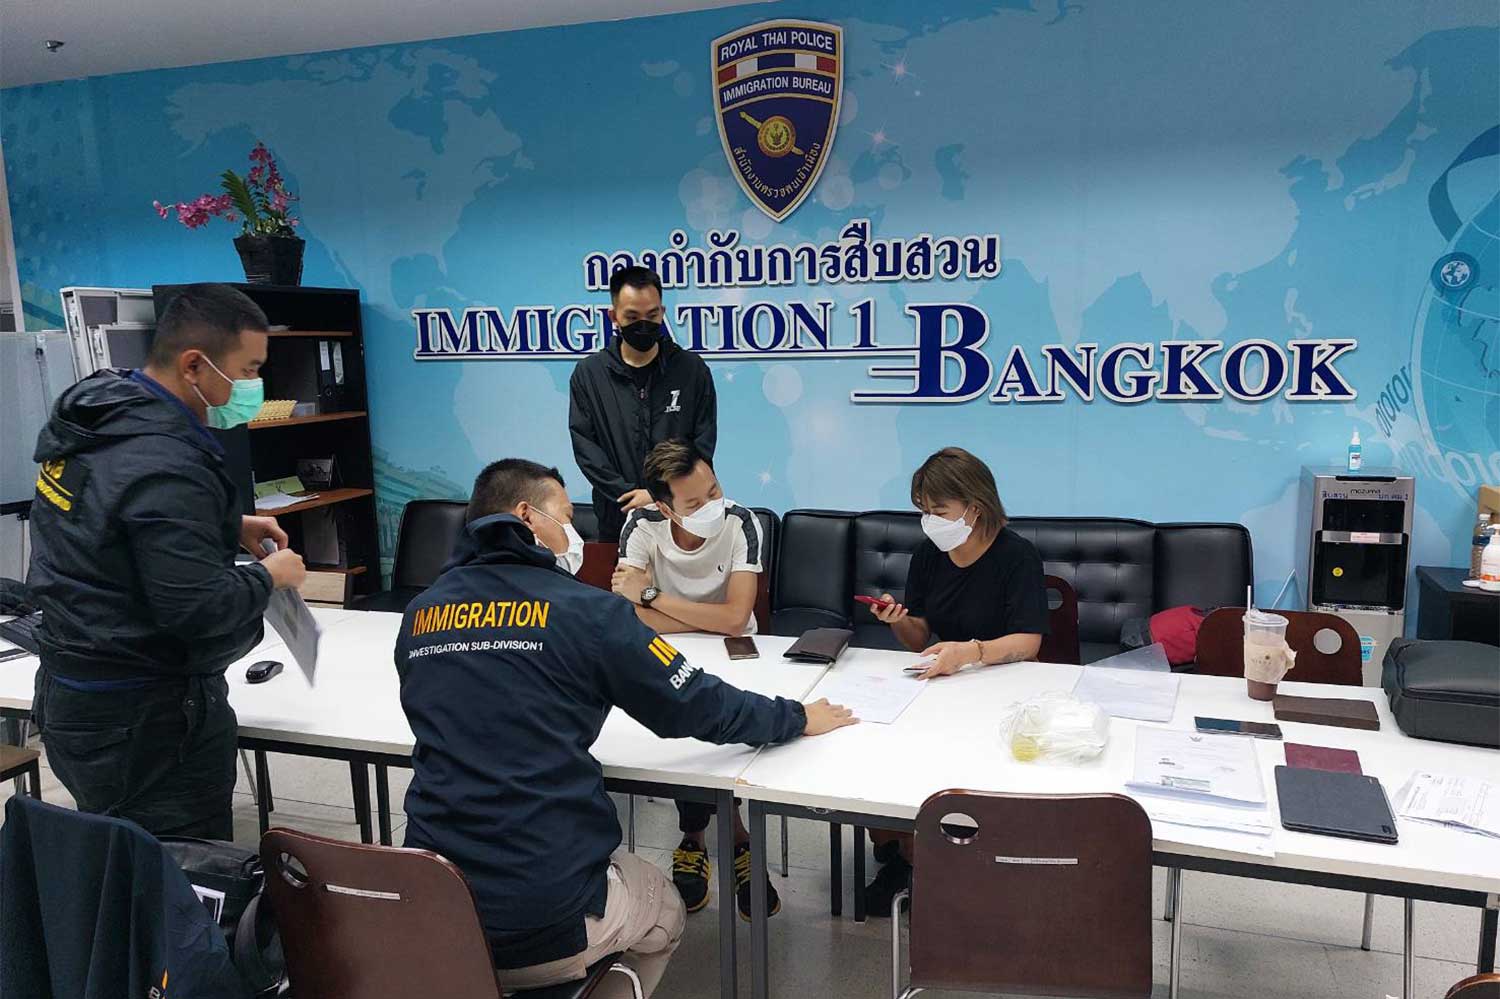 Chinese Cryptocurrency Fraudster Arrested in Bangkok